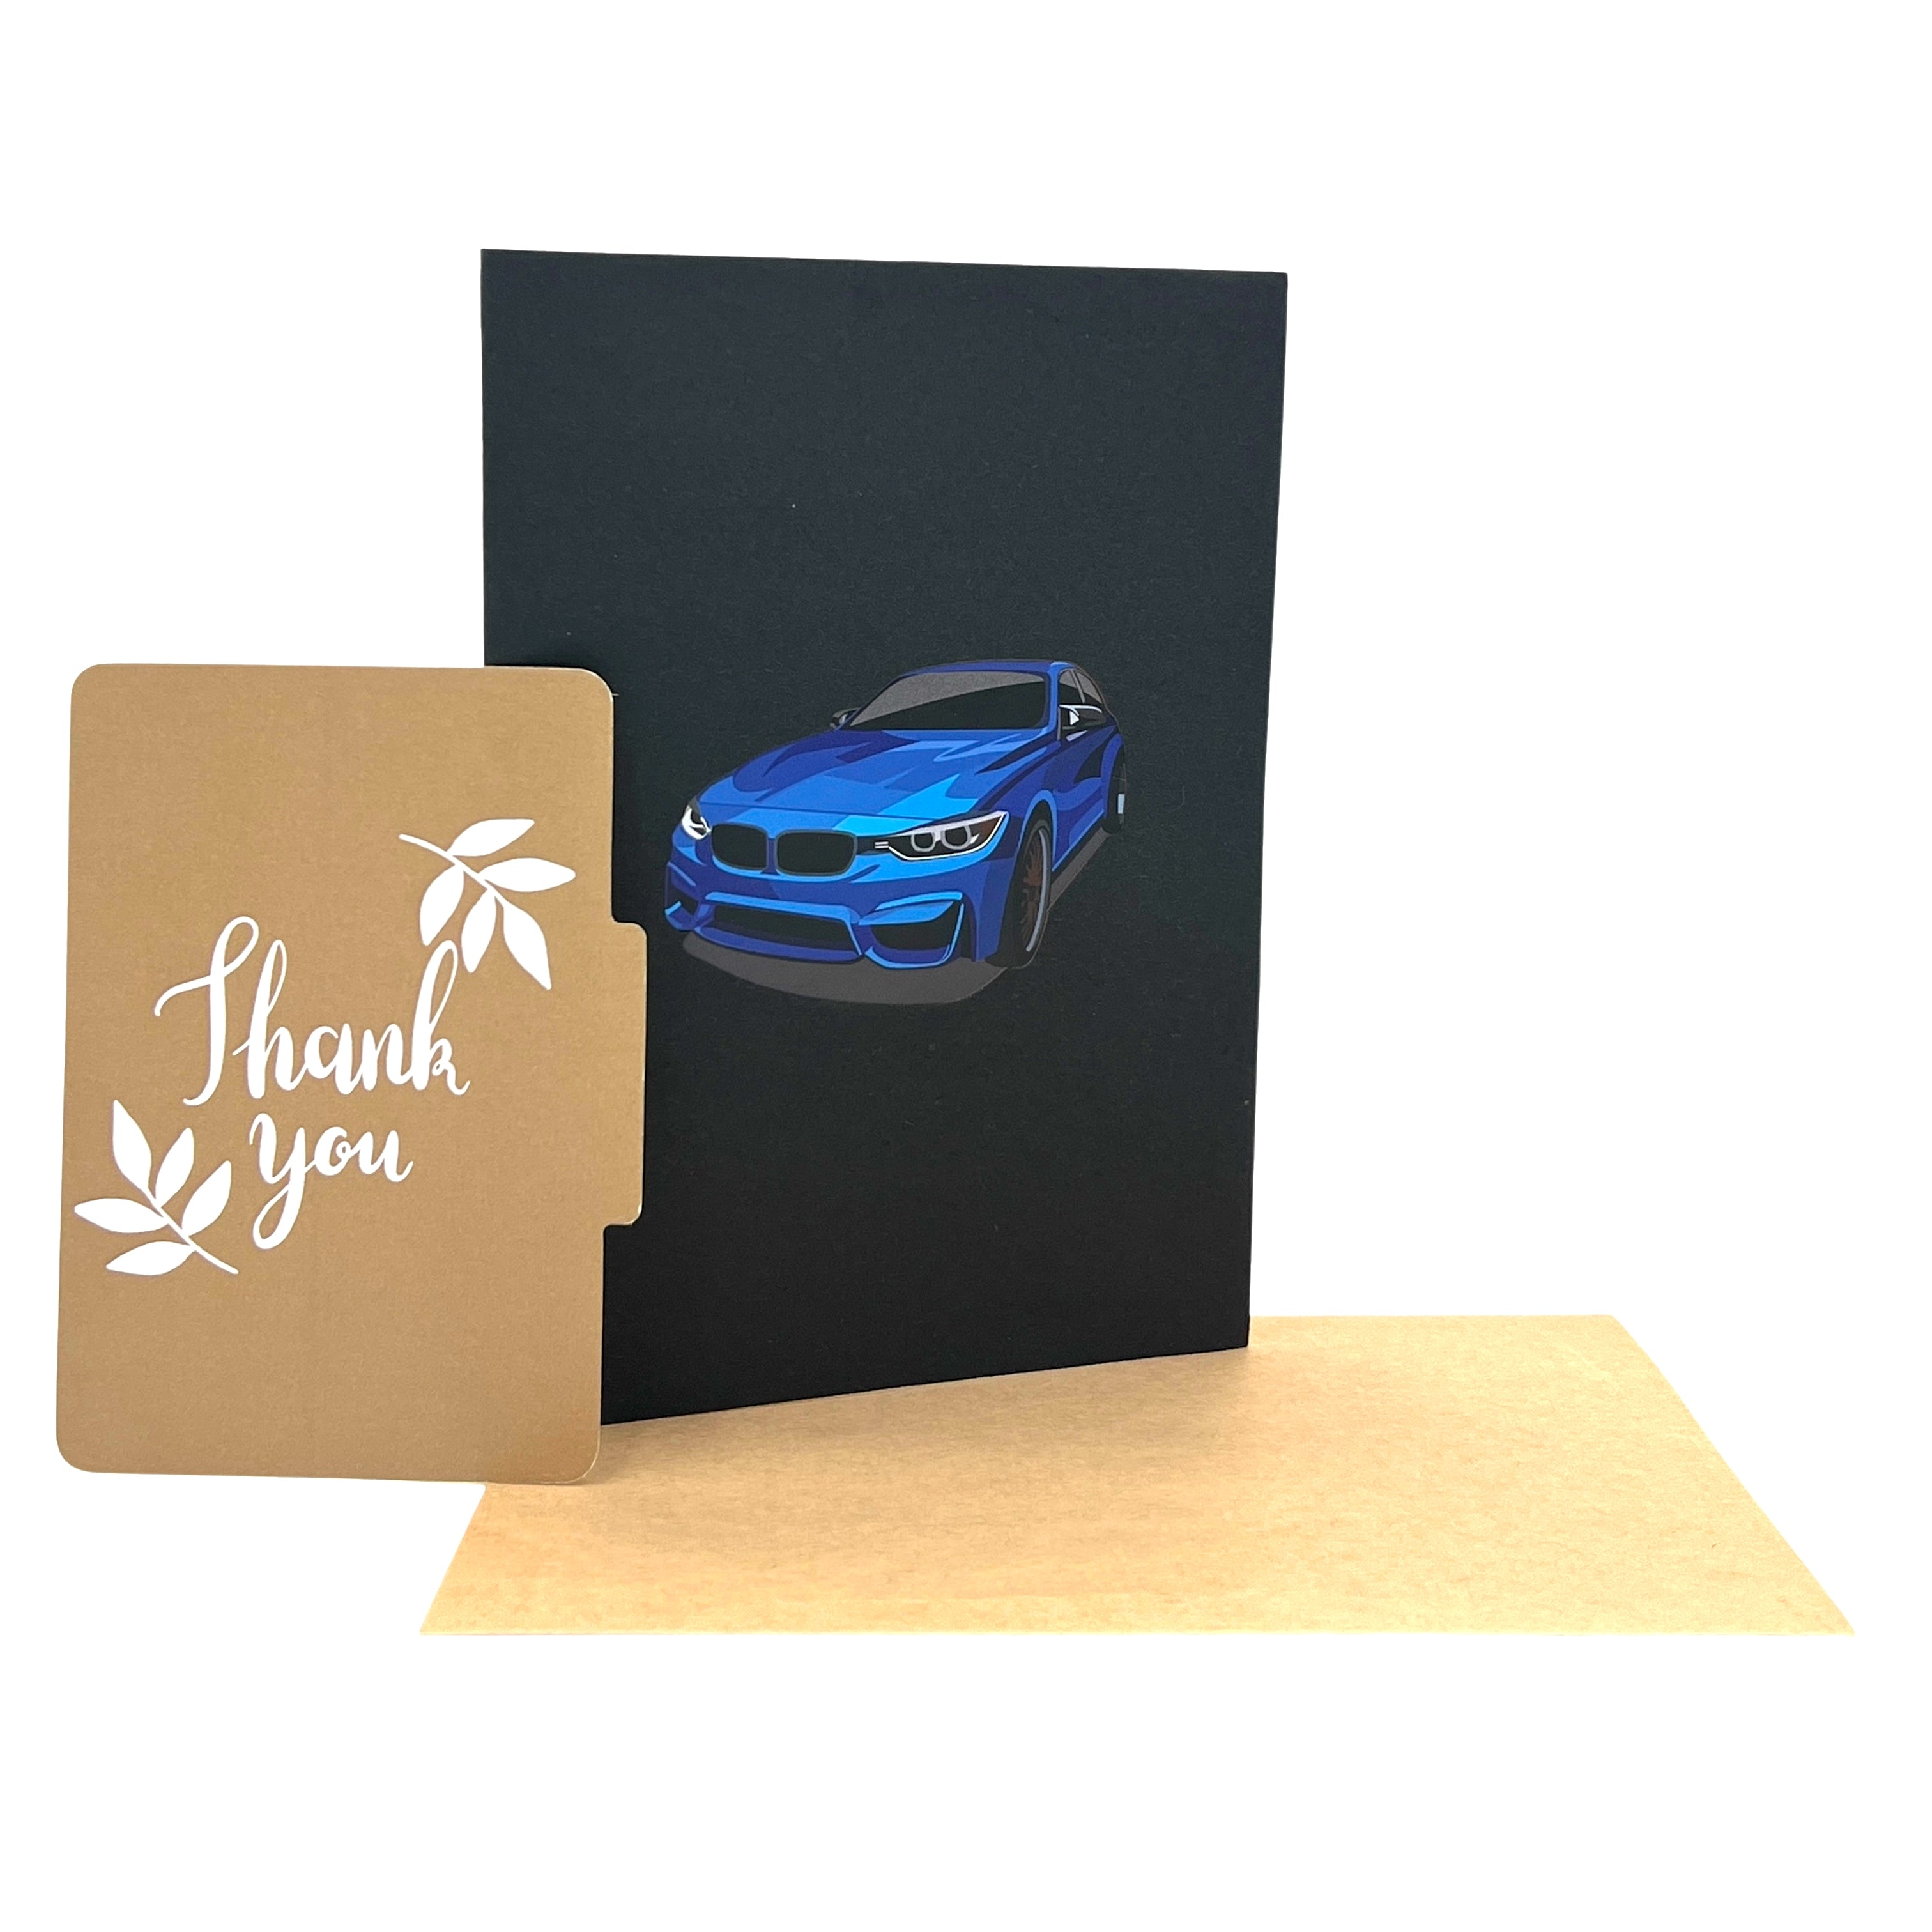 Pop Up Greeting Card Luxury Wealthy Thank You Card First Car Congratulation Birthday Gift Thank you Gift for Dad Husband Friend New Car Fun